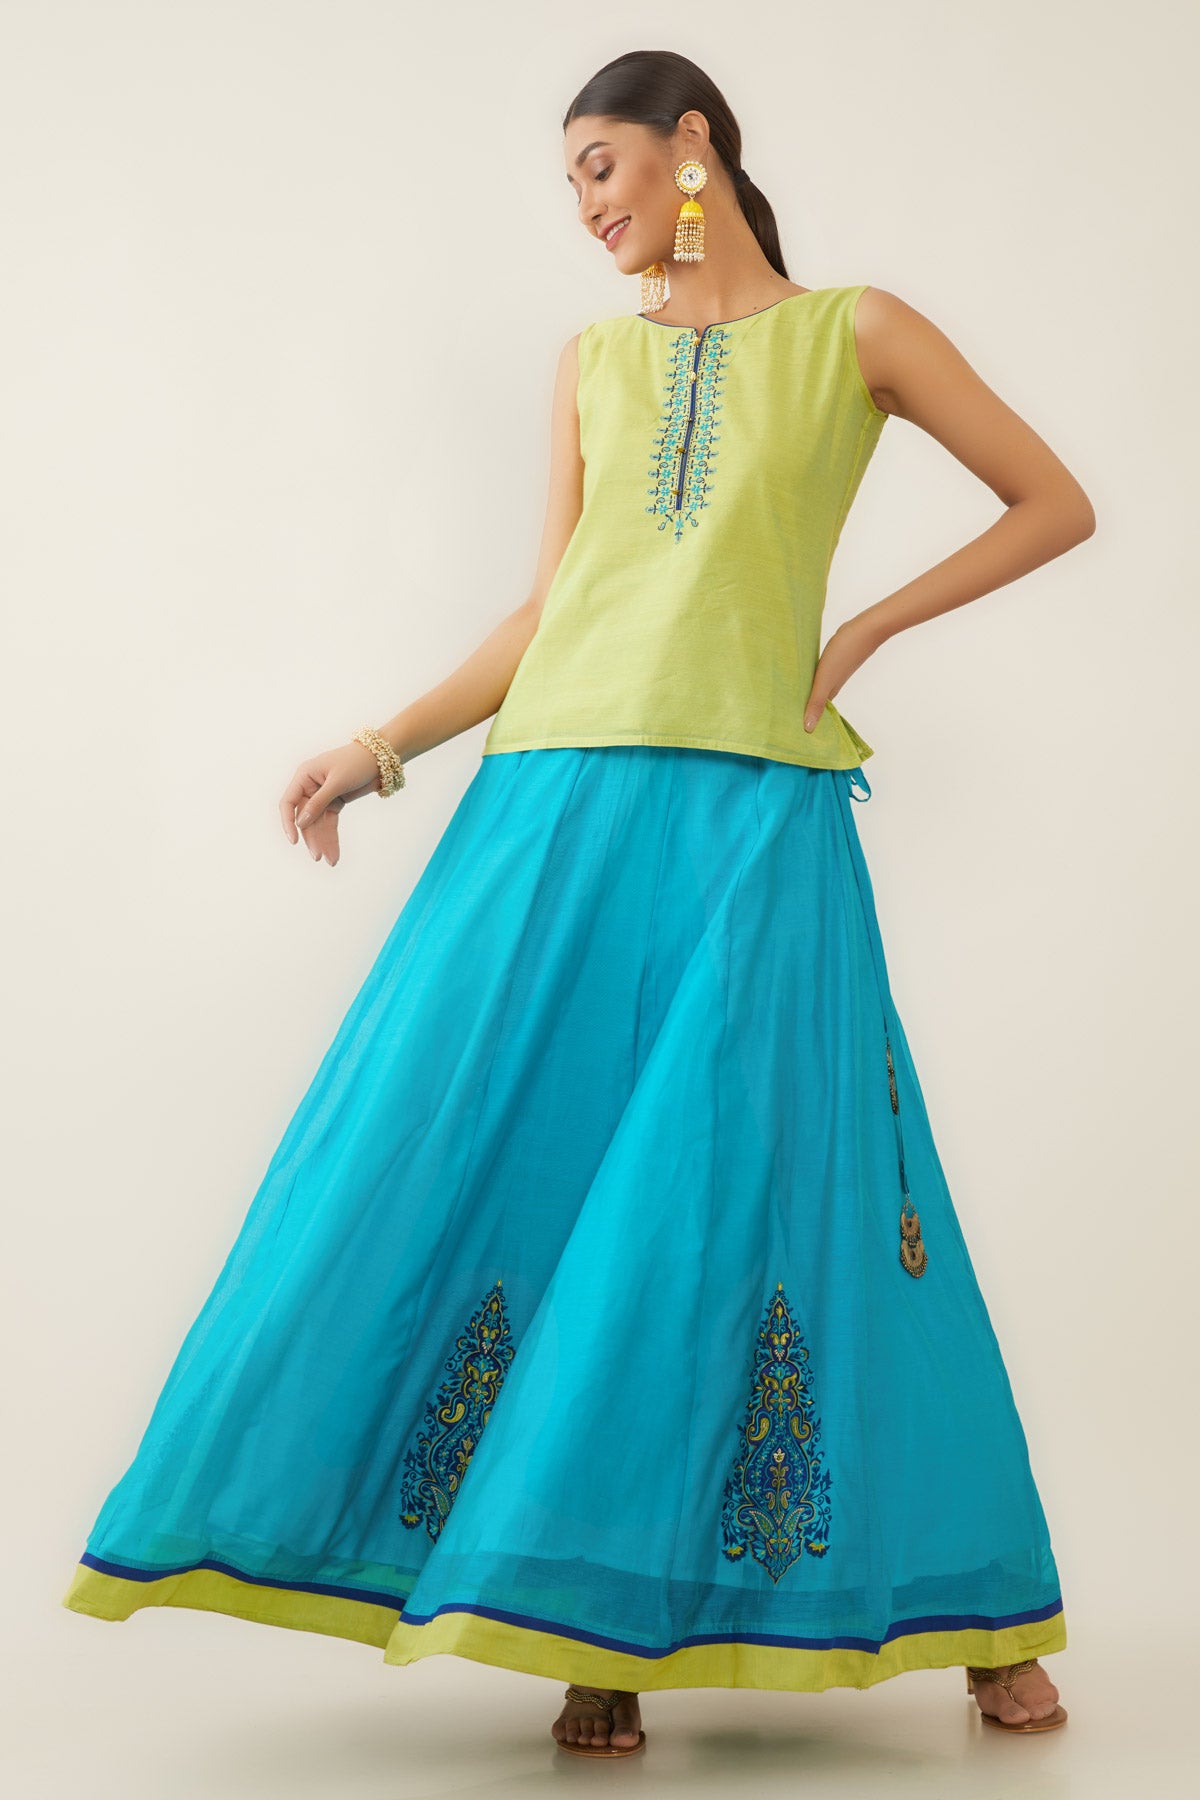 PAISLEY EMBROIDERED SKIRT SET - LIME GREEN&BLUE